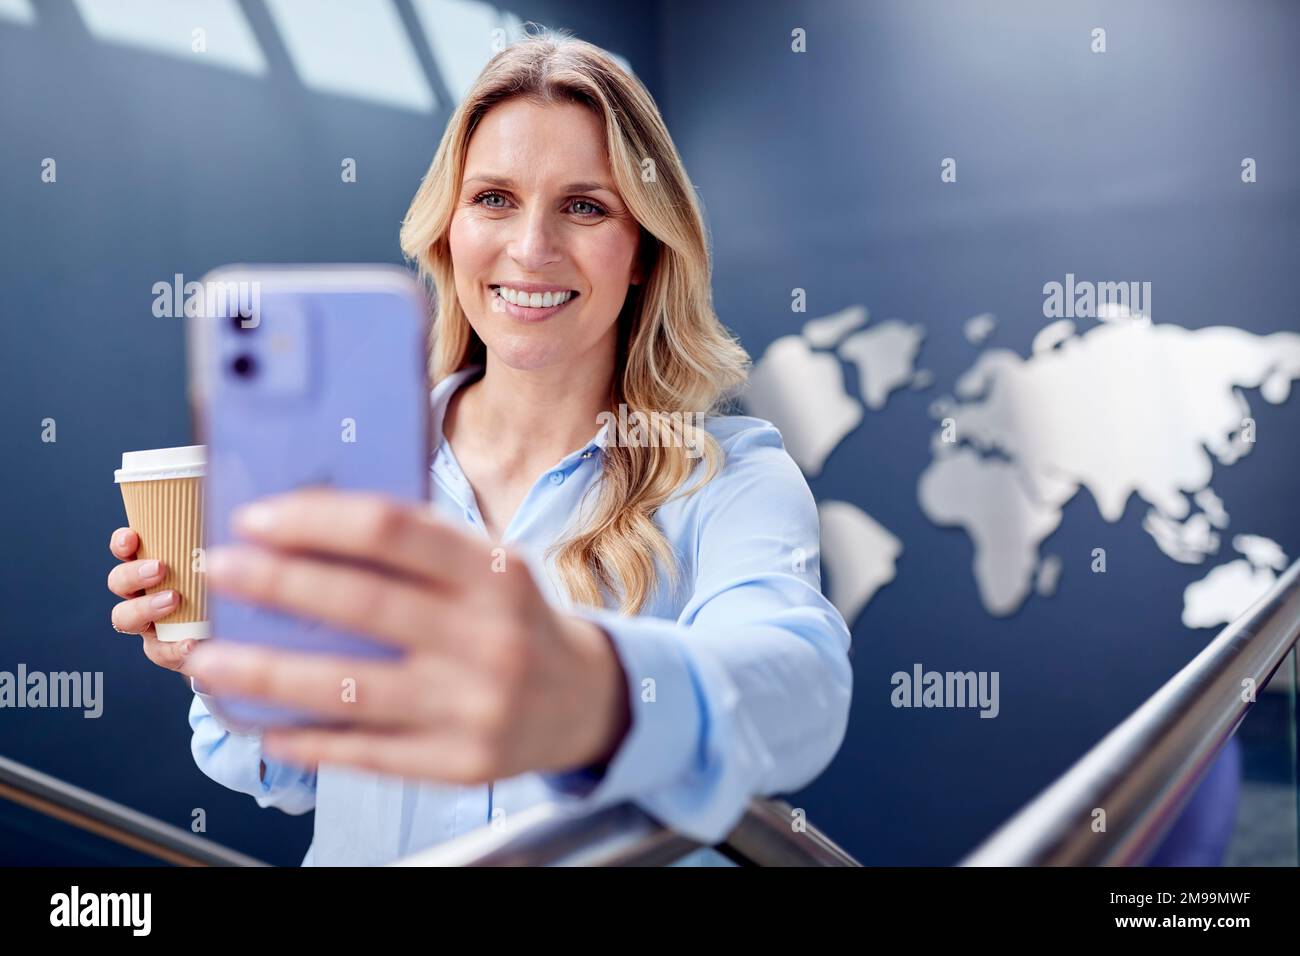 Businesswoman Looking At Mobile Phone Climbing Stairs Of Office With World Map In Background Stock Photo